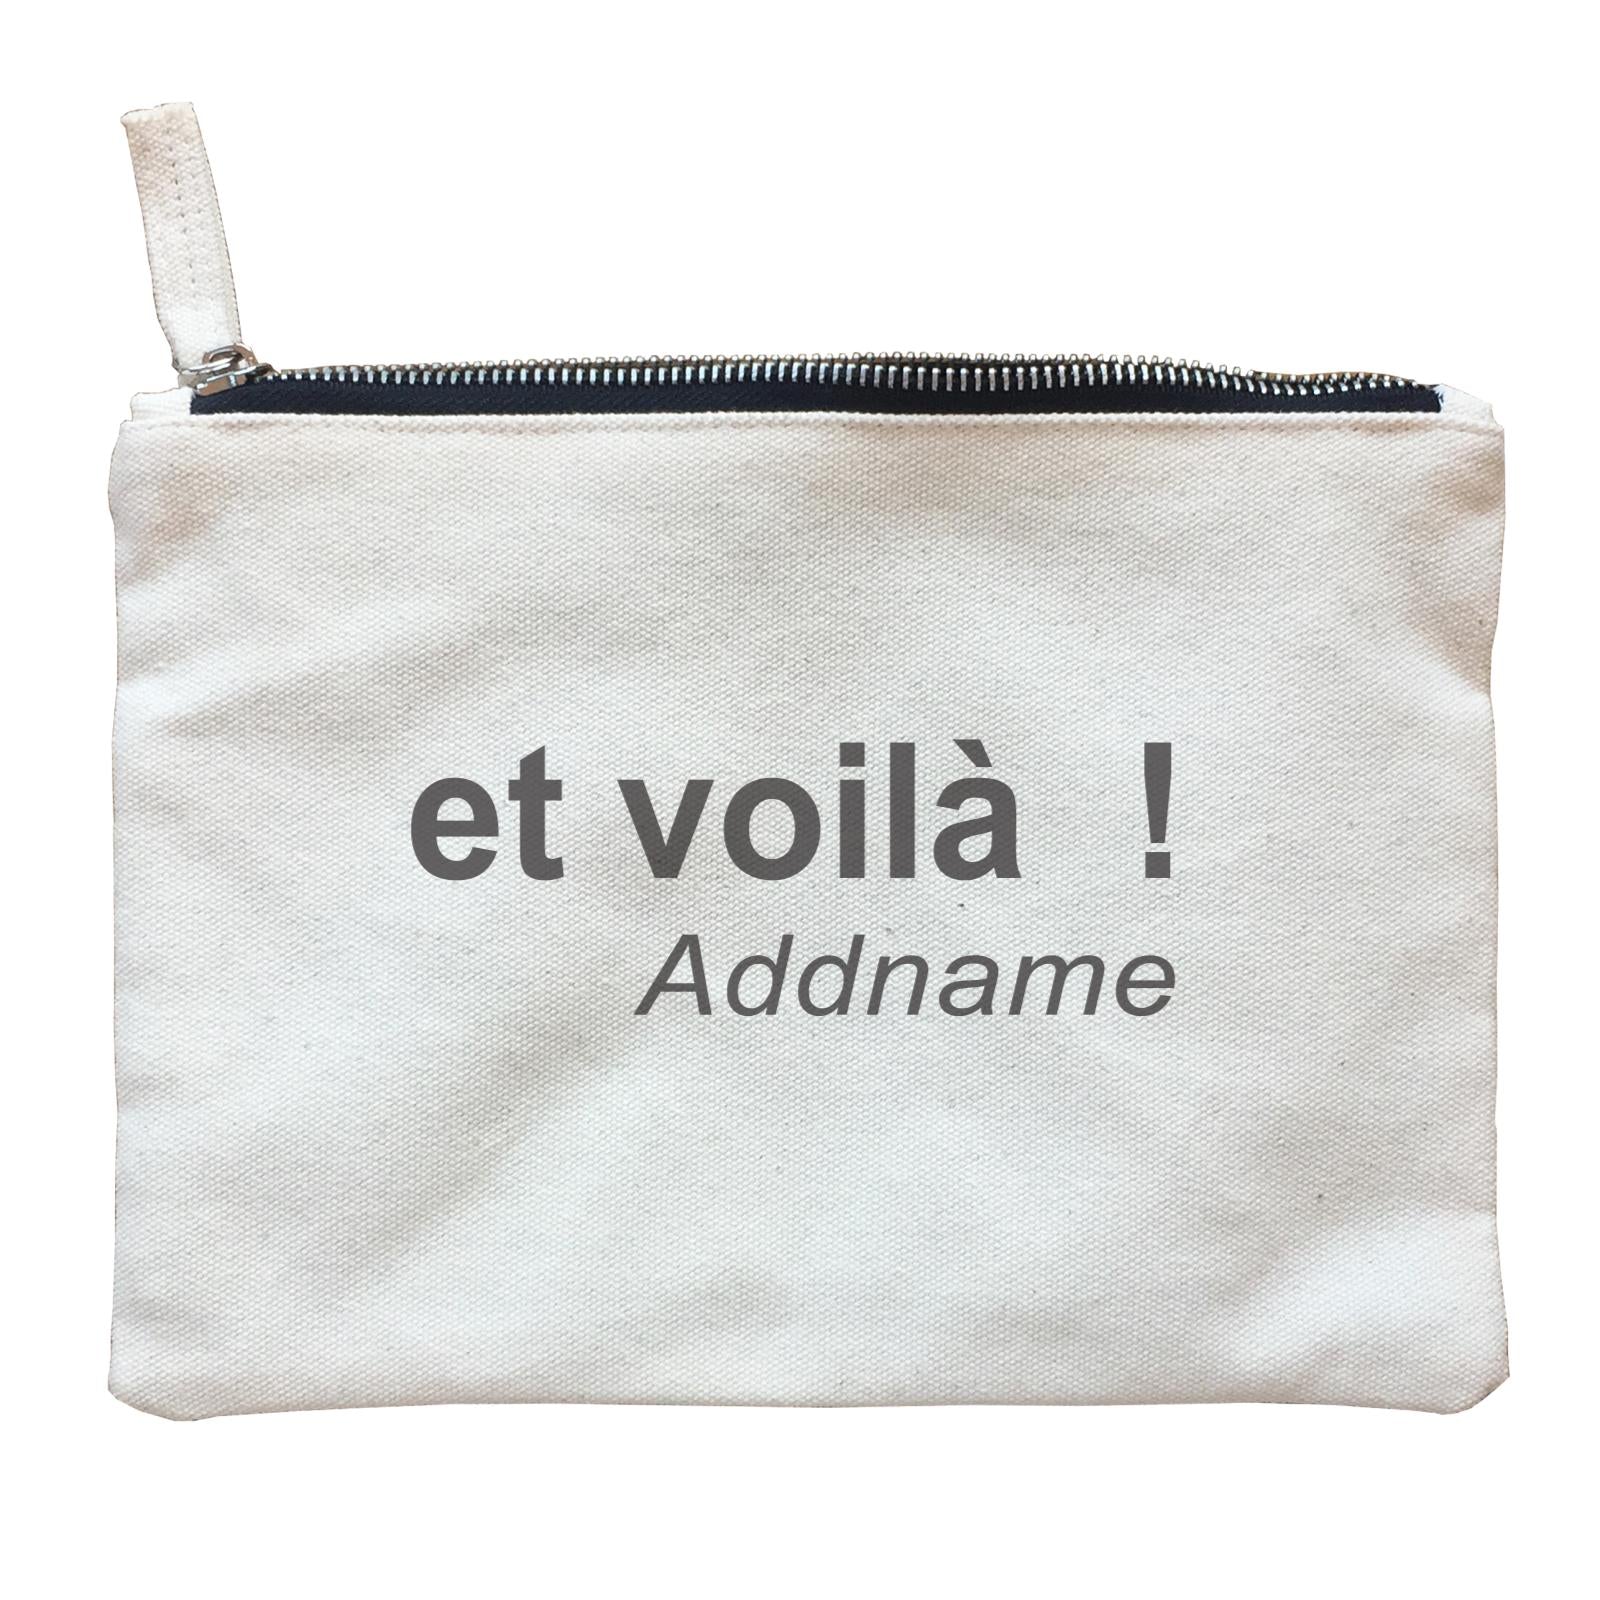 Random Quotes Et Voila Mean There You Go Addname Zipper Pouch